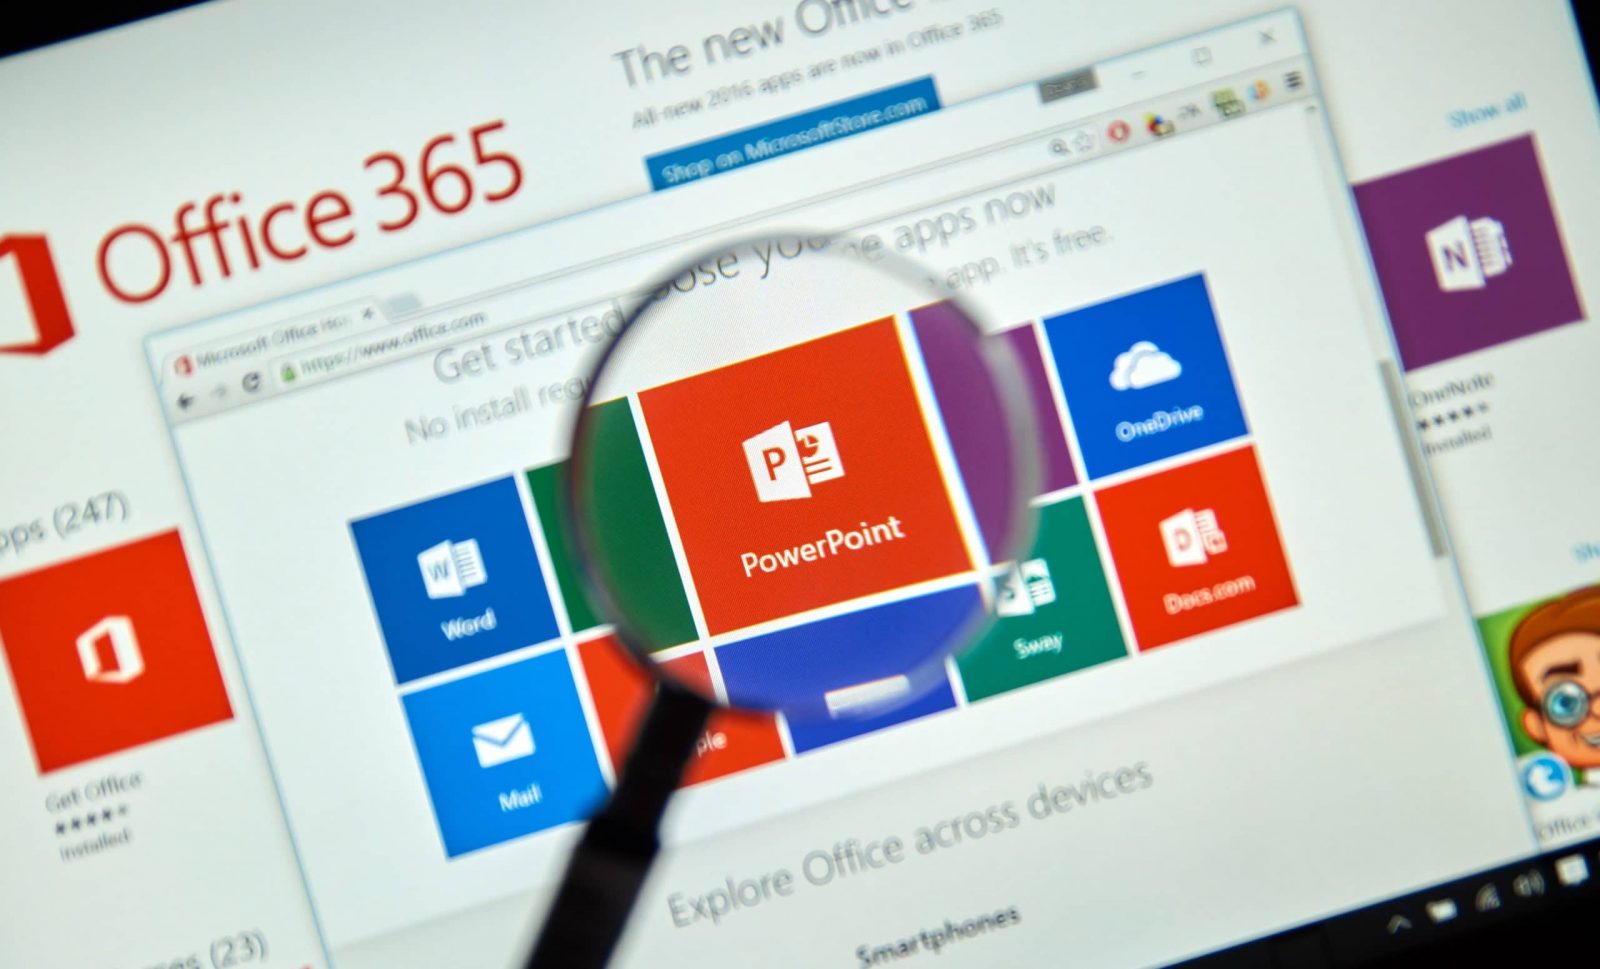 Microsoft Powerpoint and Office 365 on Laptop